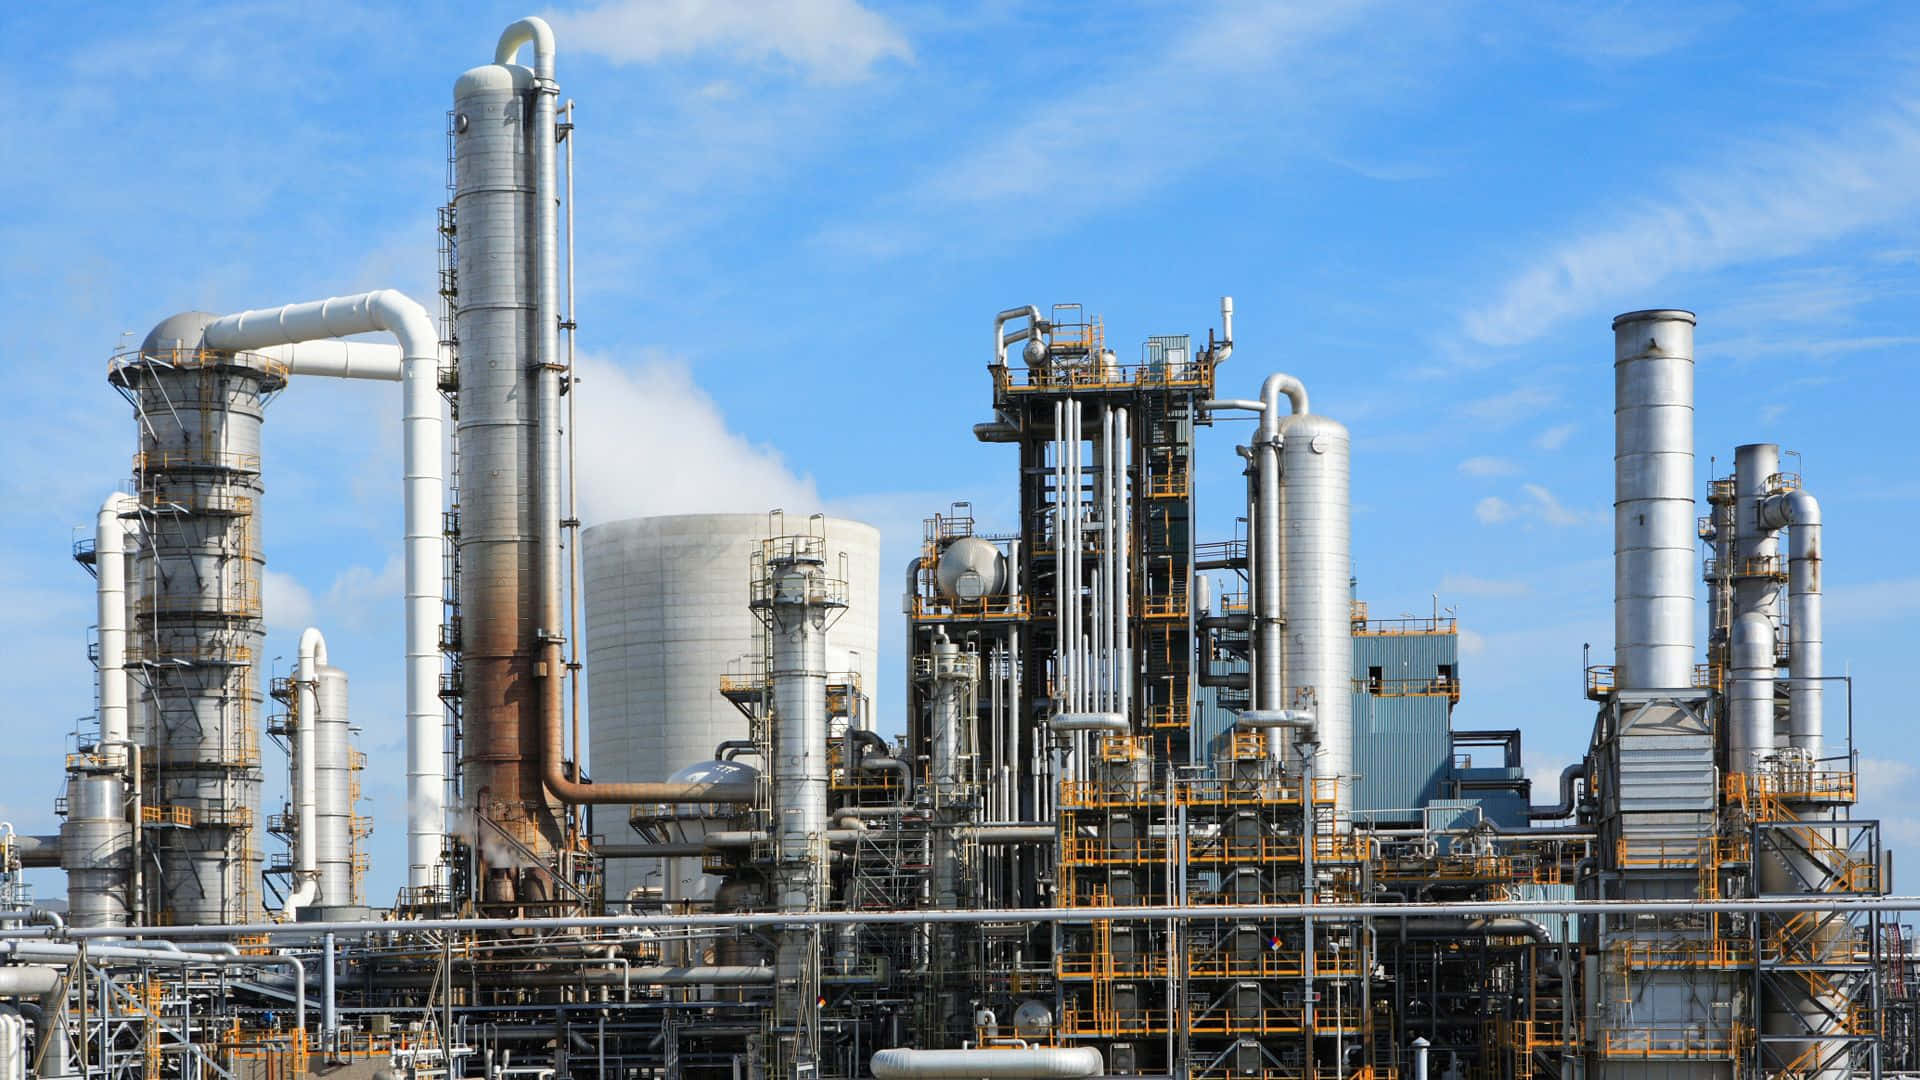 A Large Oil Refinery With Pipes And Pipes